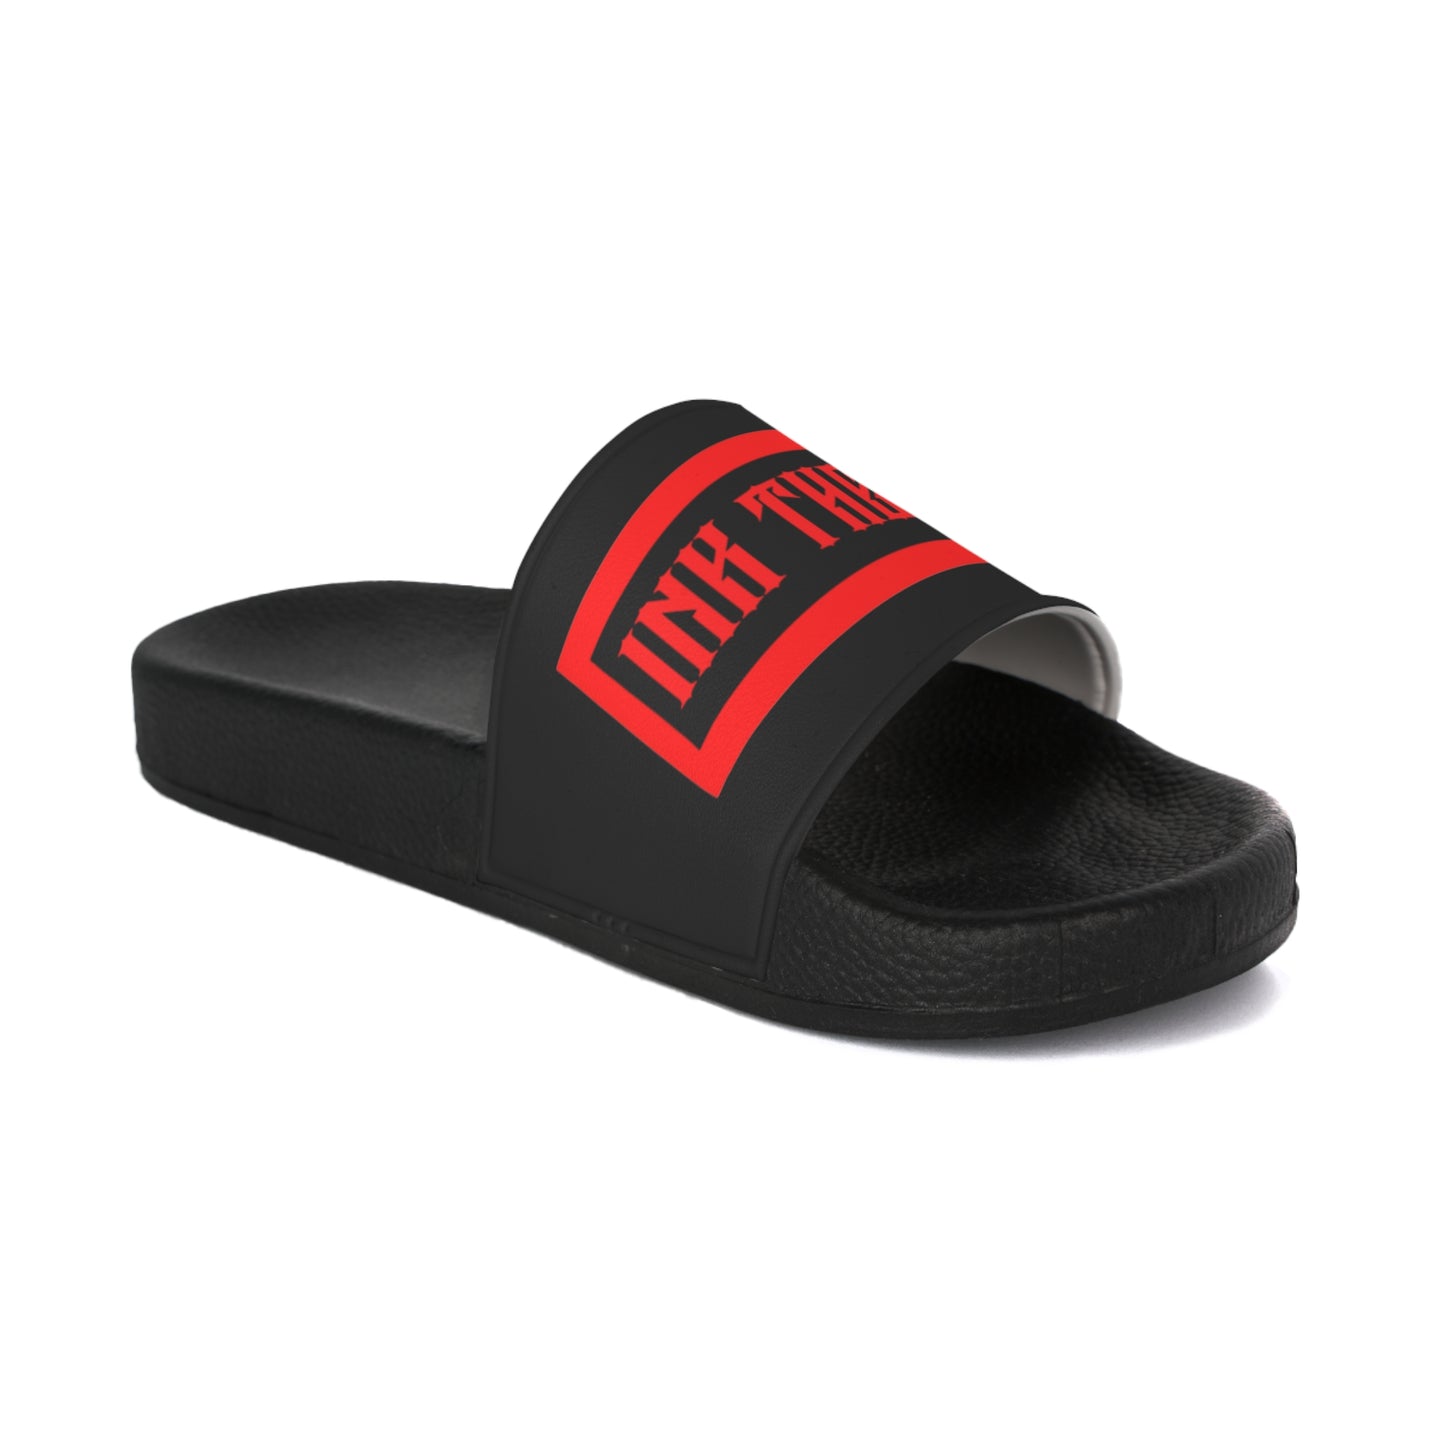 'RED' InkTherapy Slides